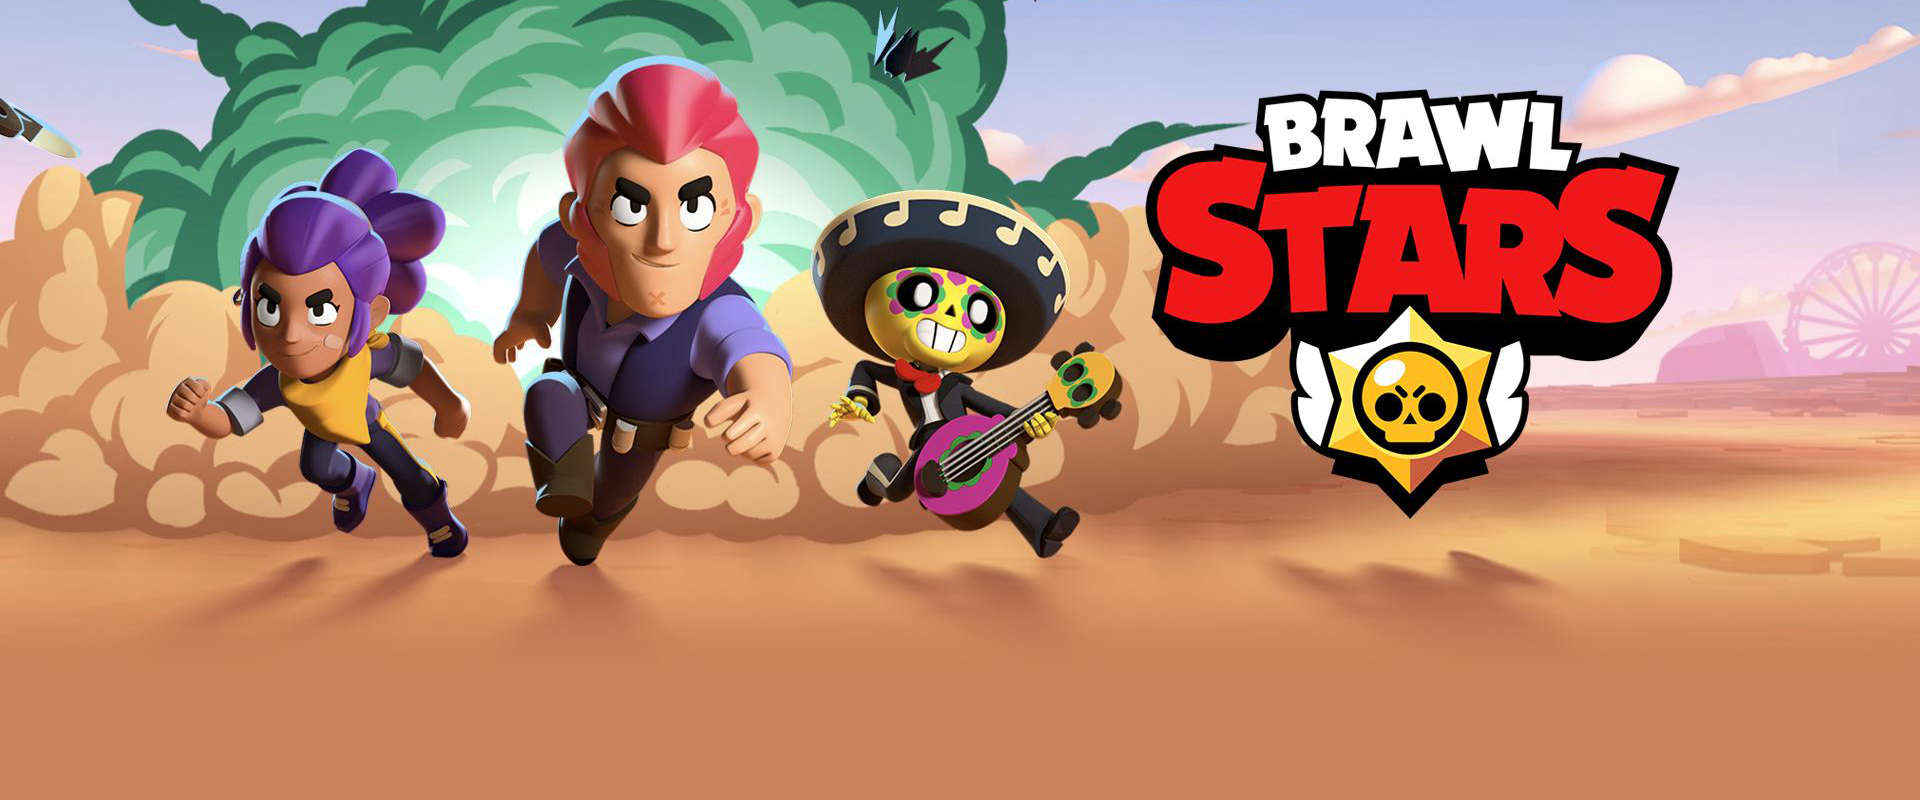 Free Android Emulator For Brawl Stars Monomousumi - brawl stars game for android